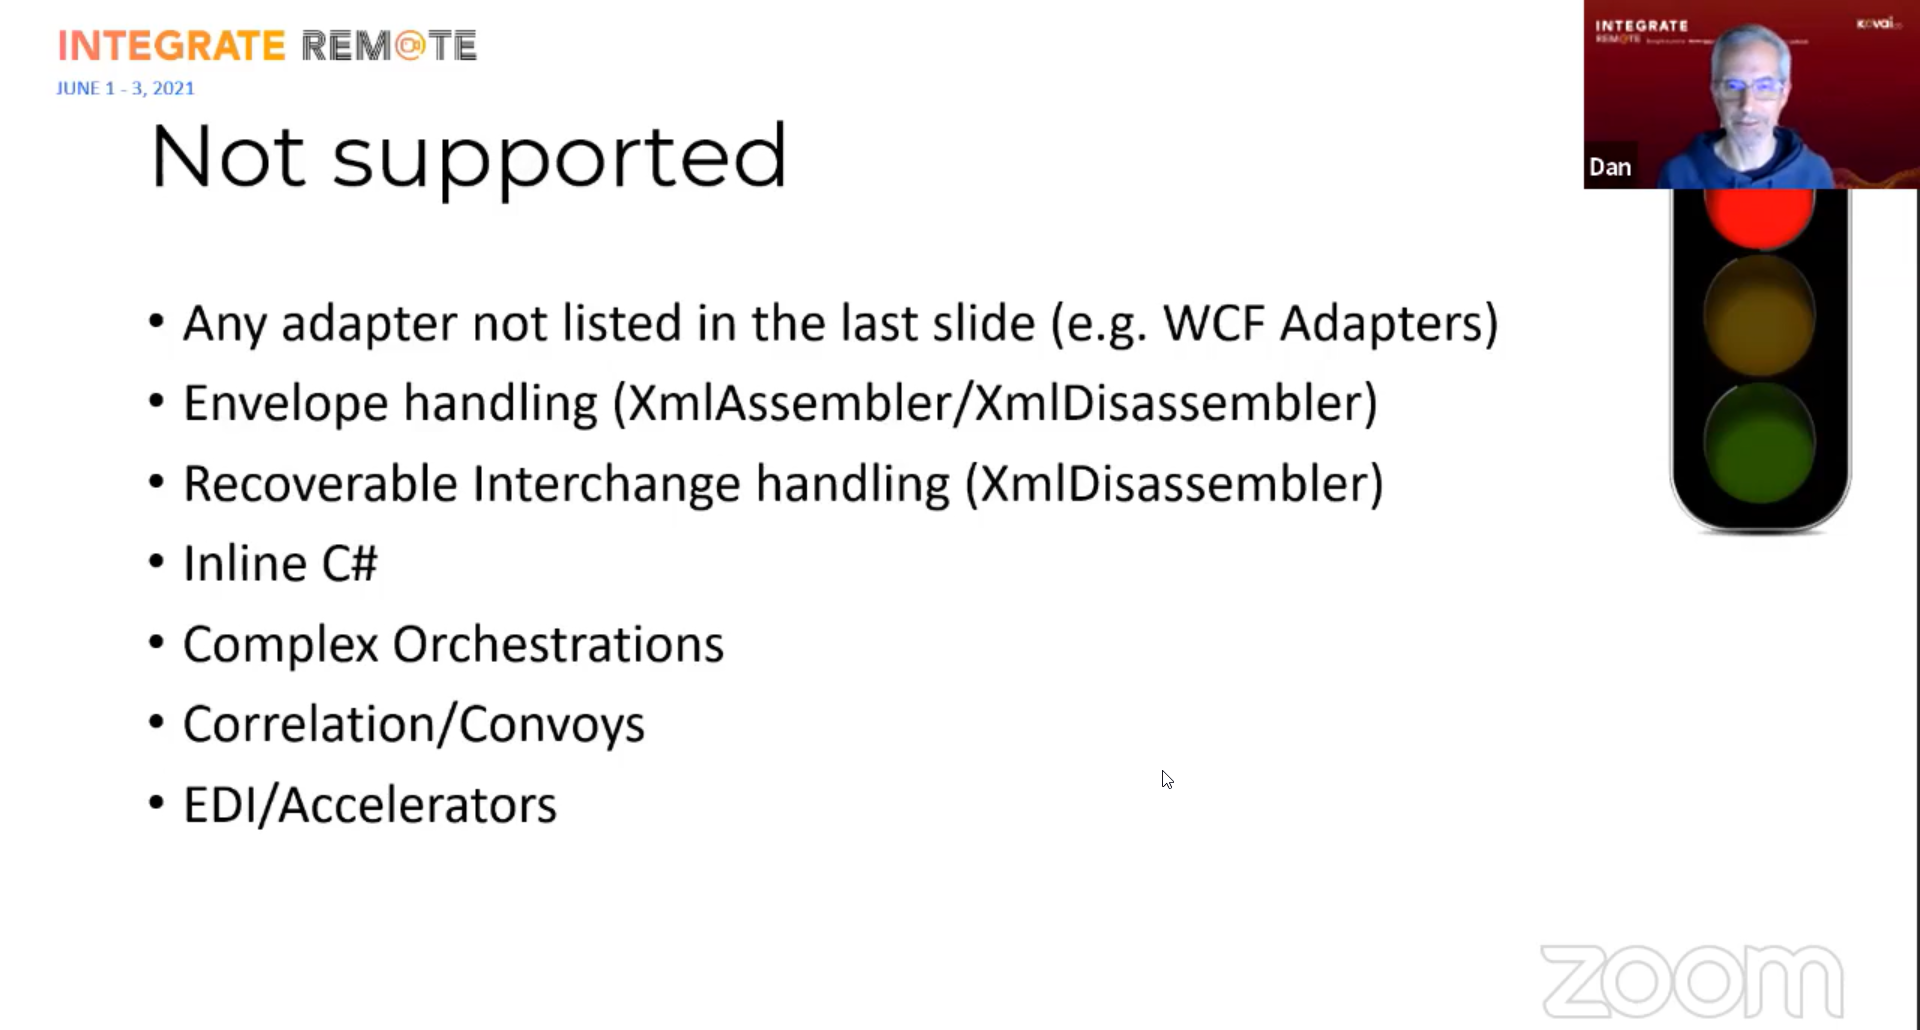 Not Supported features for migration